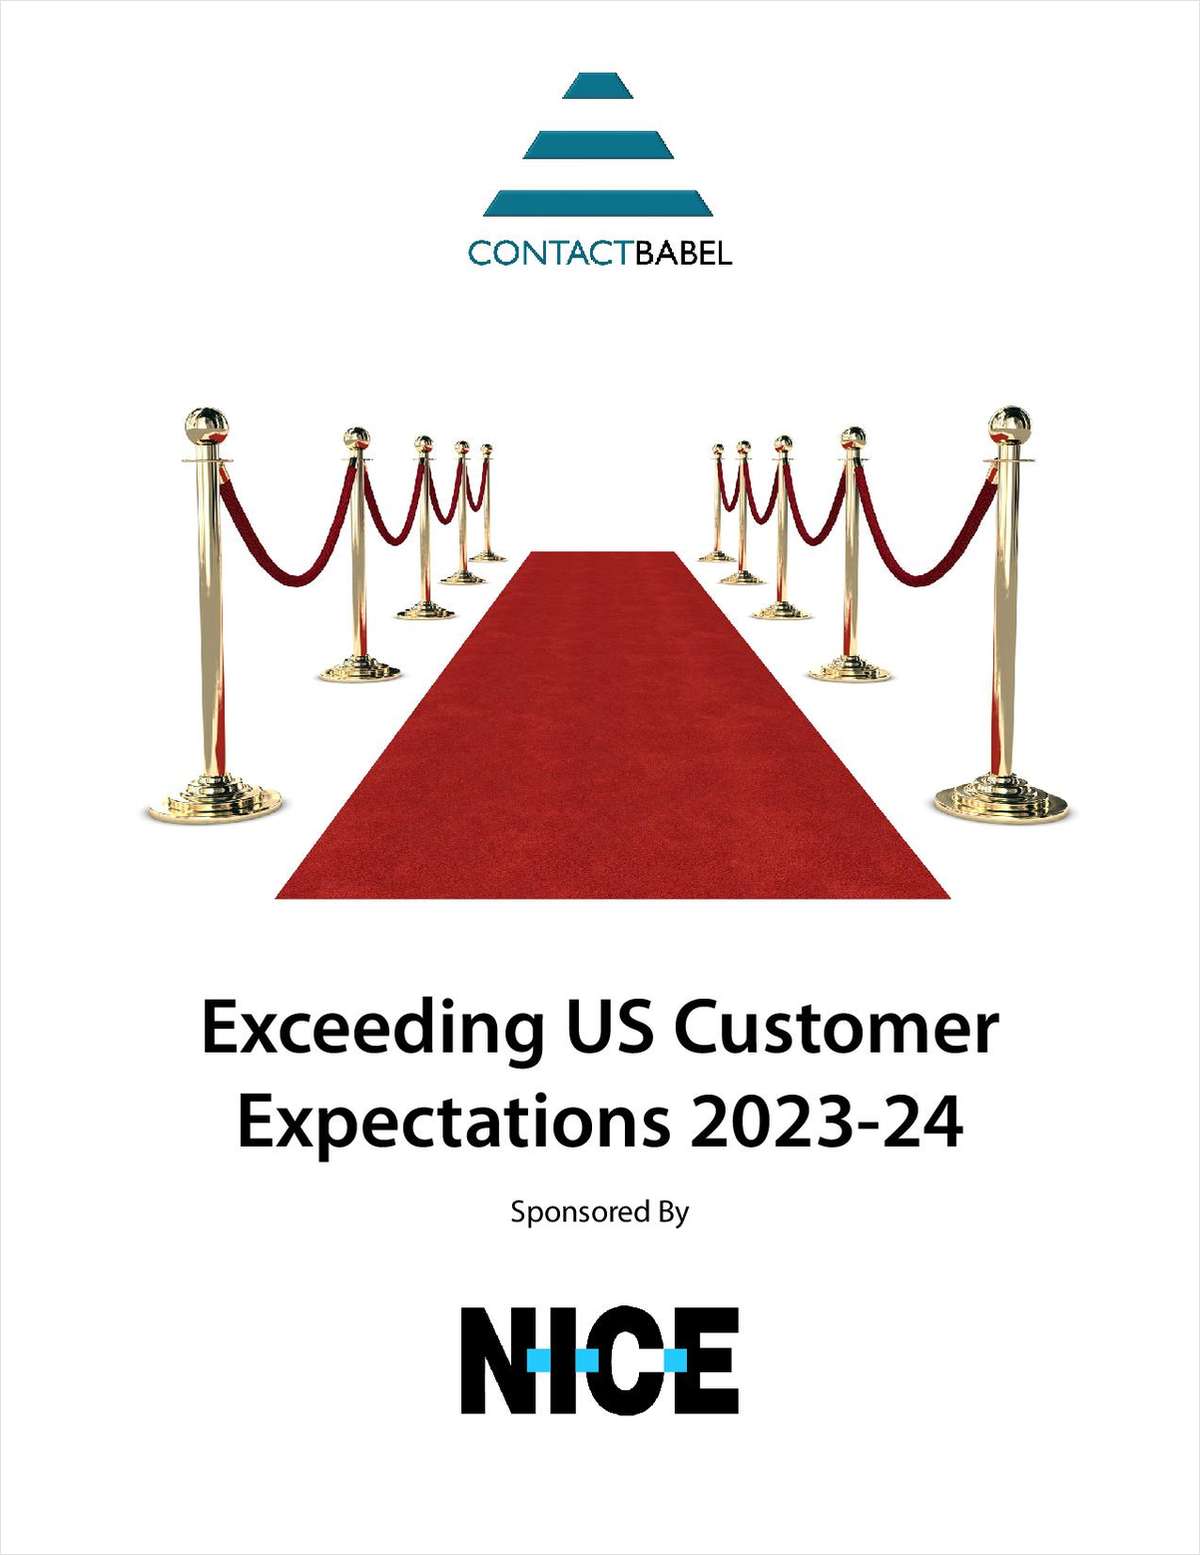 ContactBabel Exceeding US Customer Expectations: 2023-24